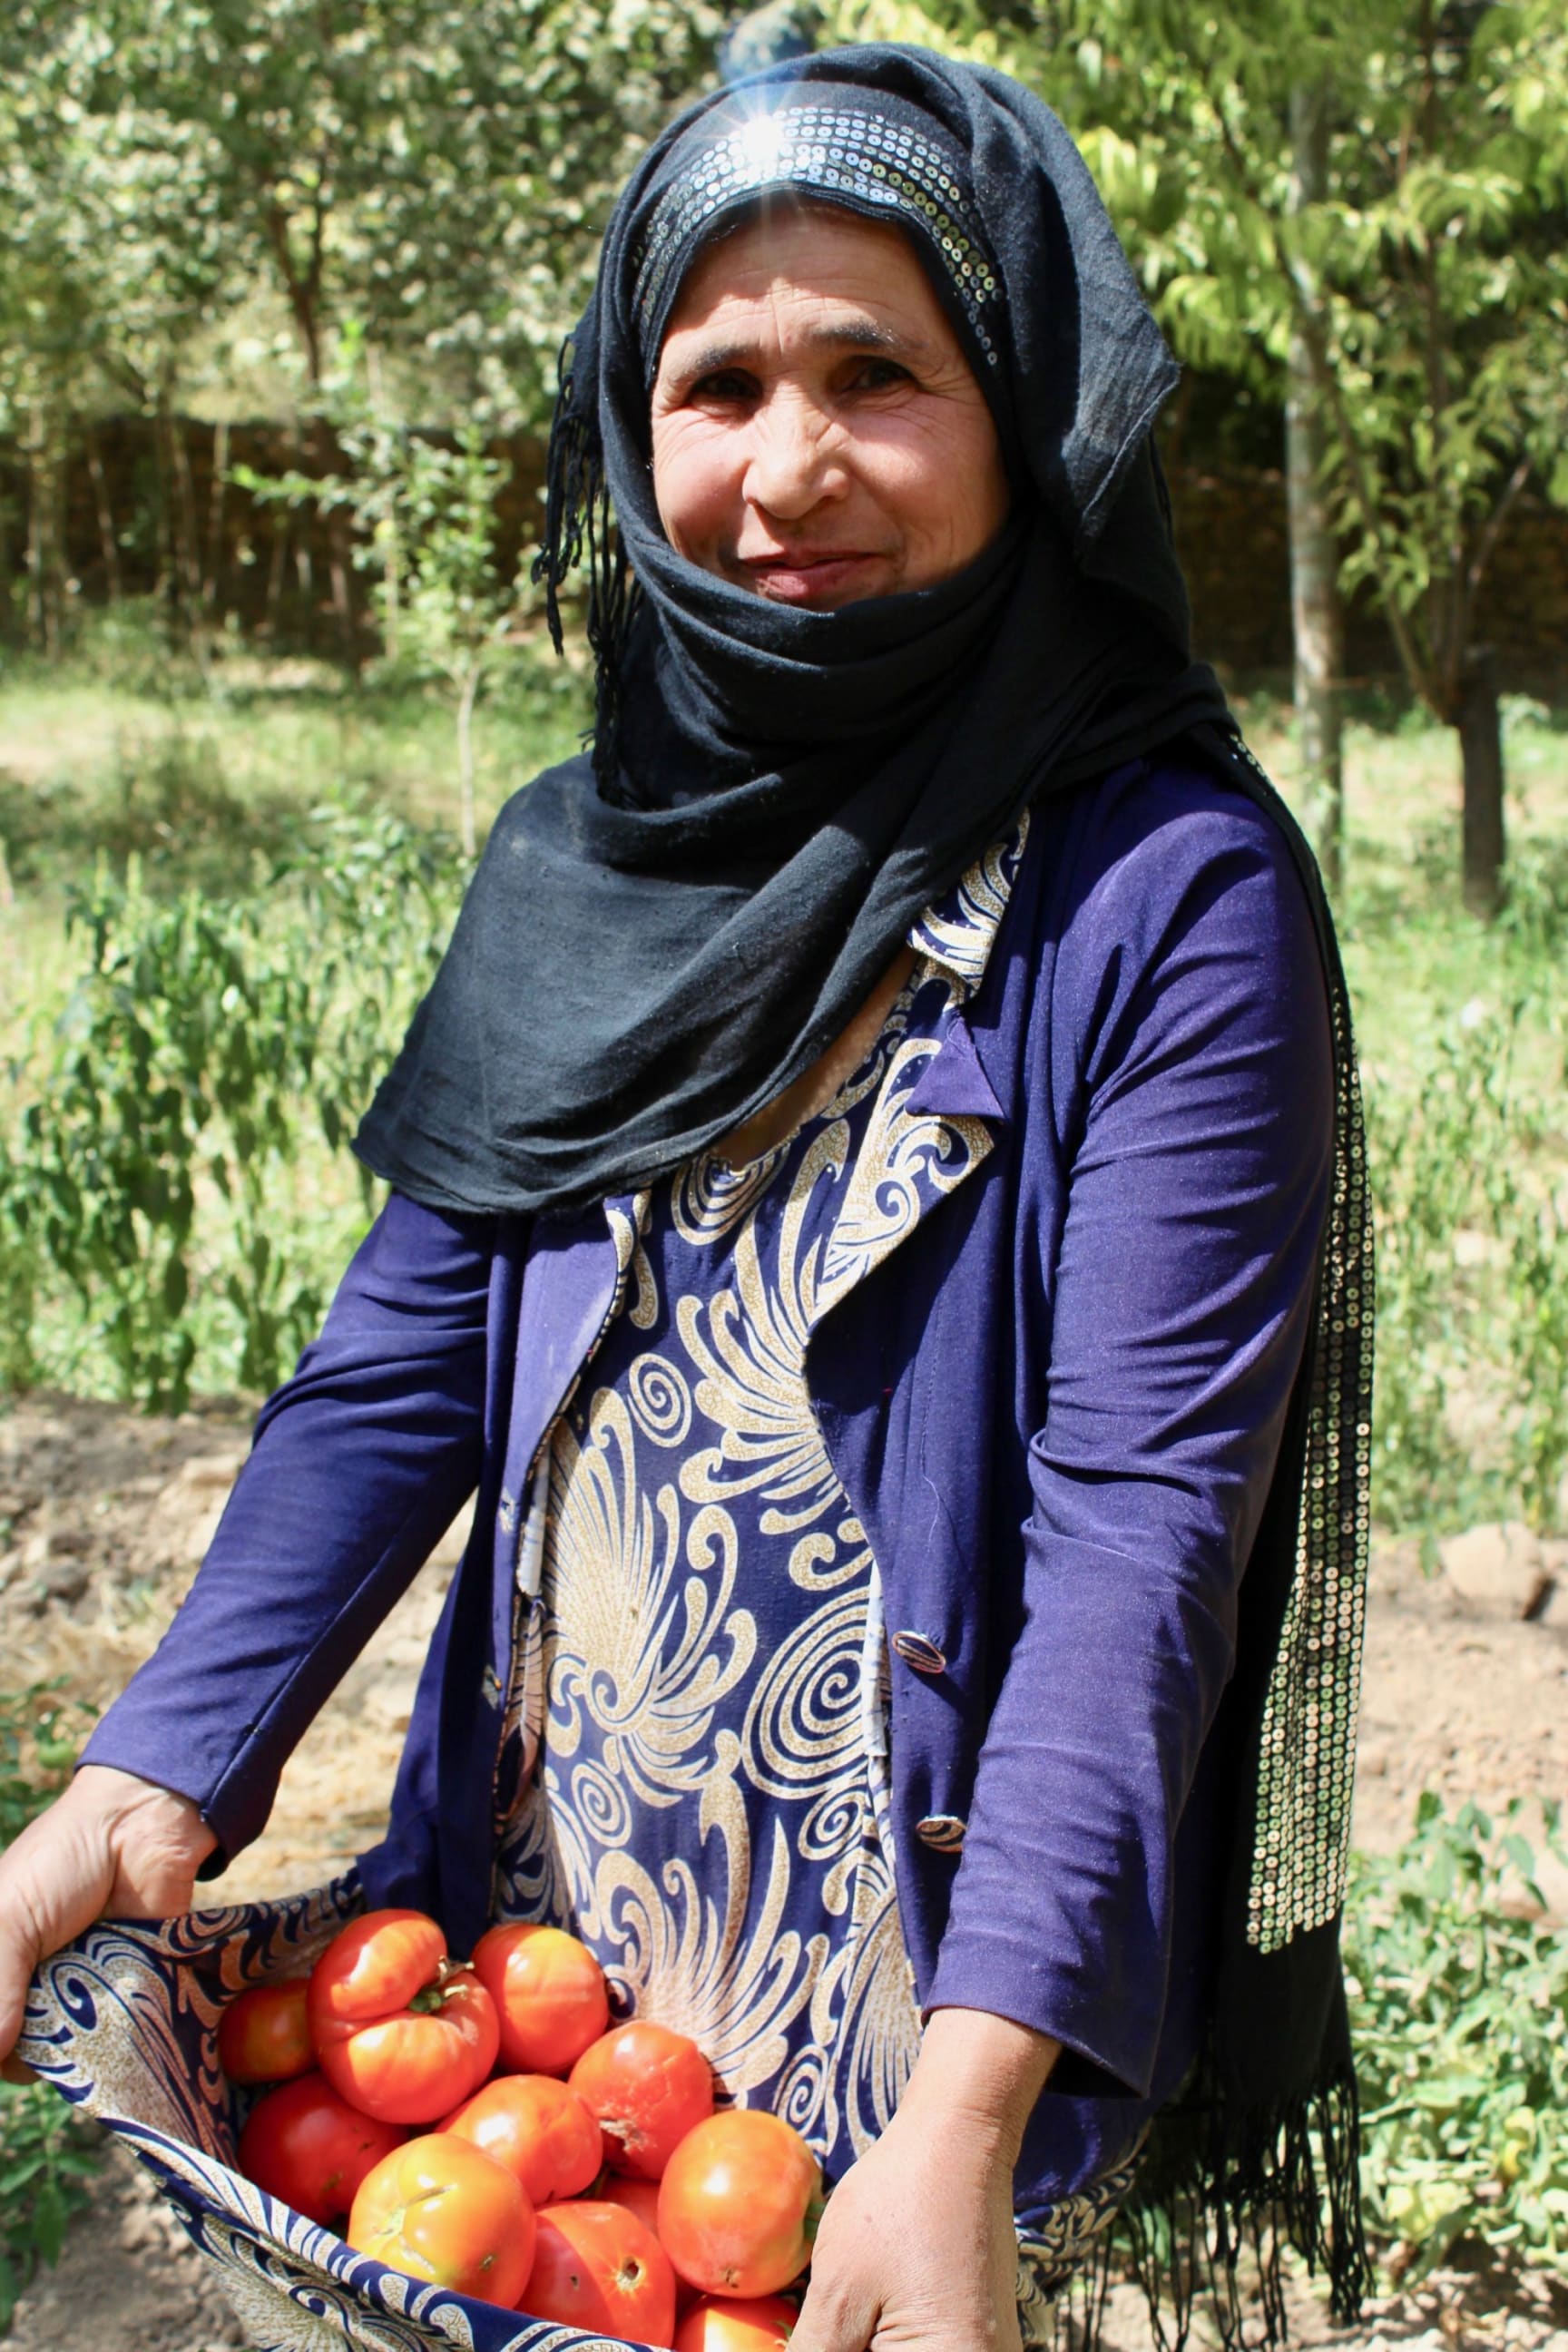 A woman called Sabza is pictured wearing a navy scarf wrapped around her head like a hijab, and a blue jacket. Under the jacket she is wearing a blue tunic with an abstract cream print which she is holding up to create a basket for some red tomatoes. Sabza is half-smiling at the camera against a background of green vegetation and trees.